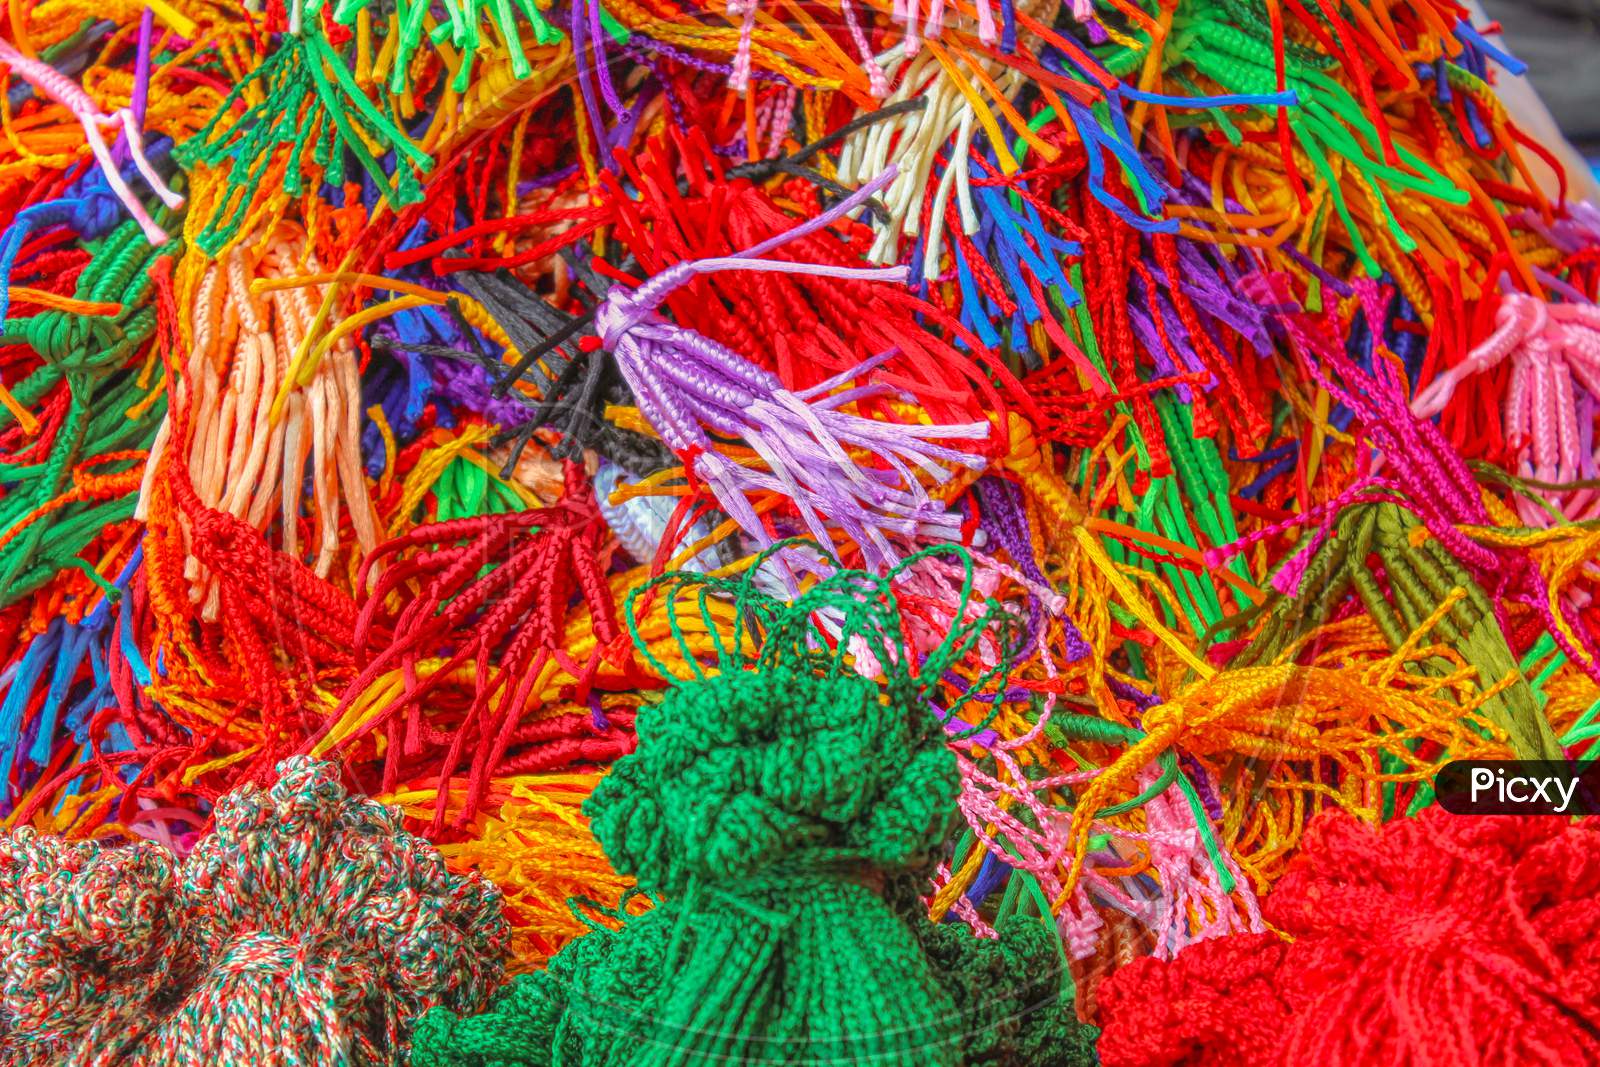 Colorful Holy threads at the Buddhist Monastery in Bylukoppa/India.